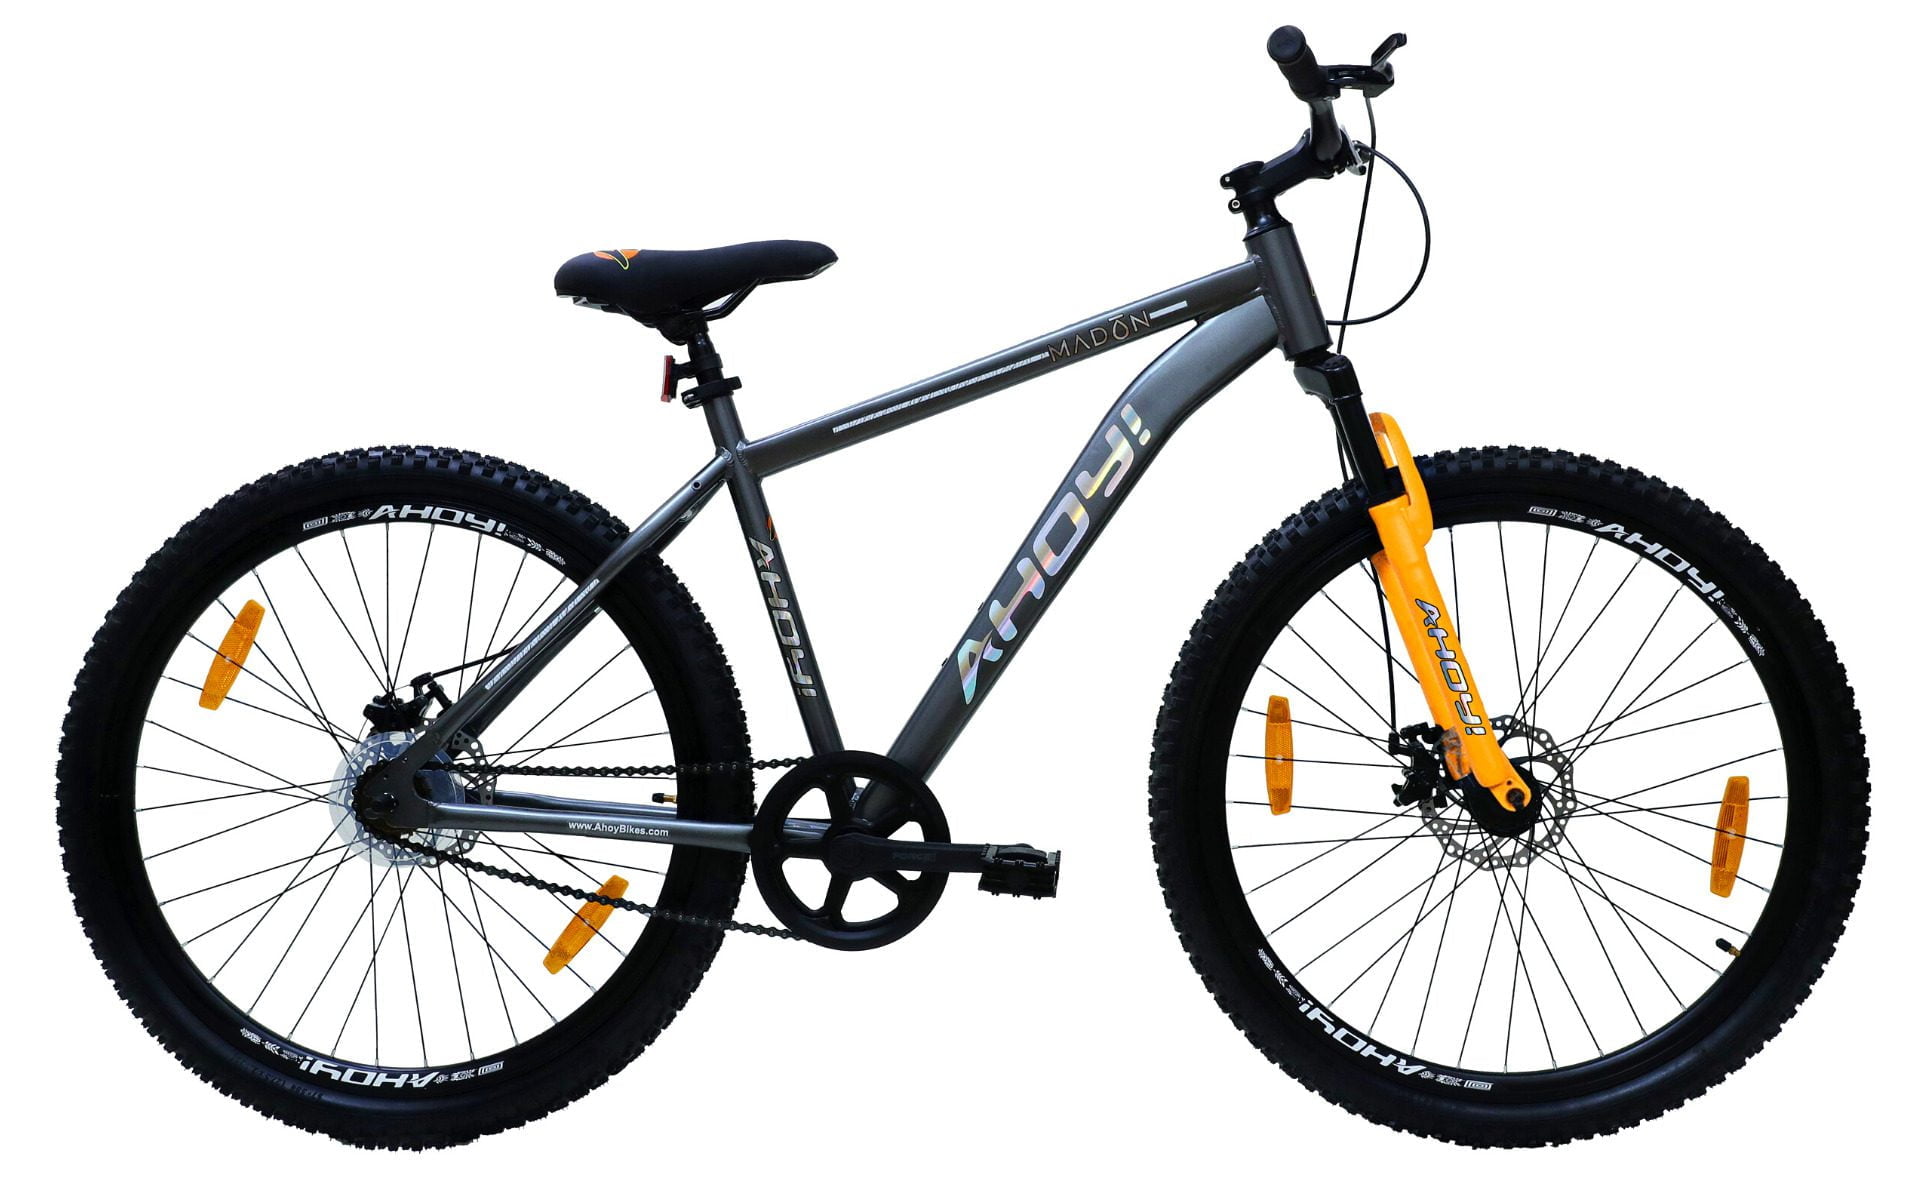 Madon Single Speed Cycle 27.5T | Buy grey non gear bike for men